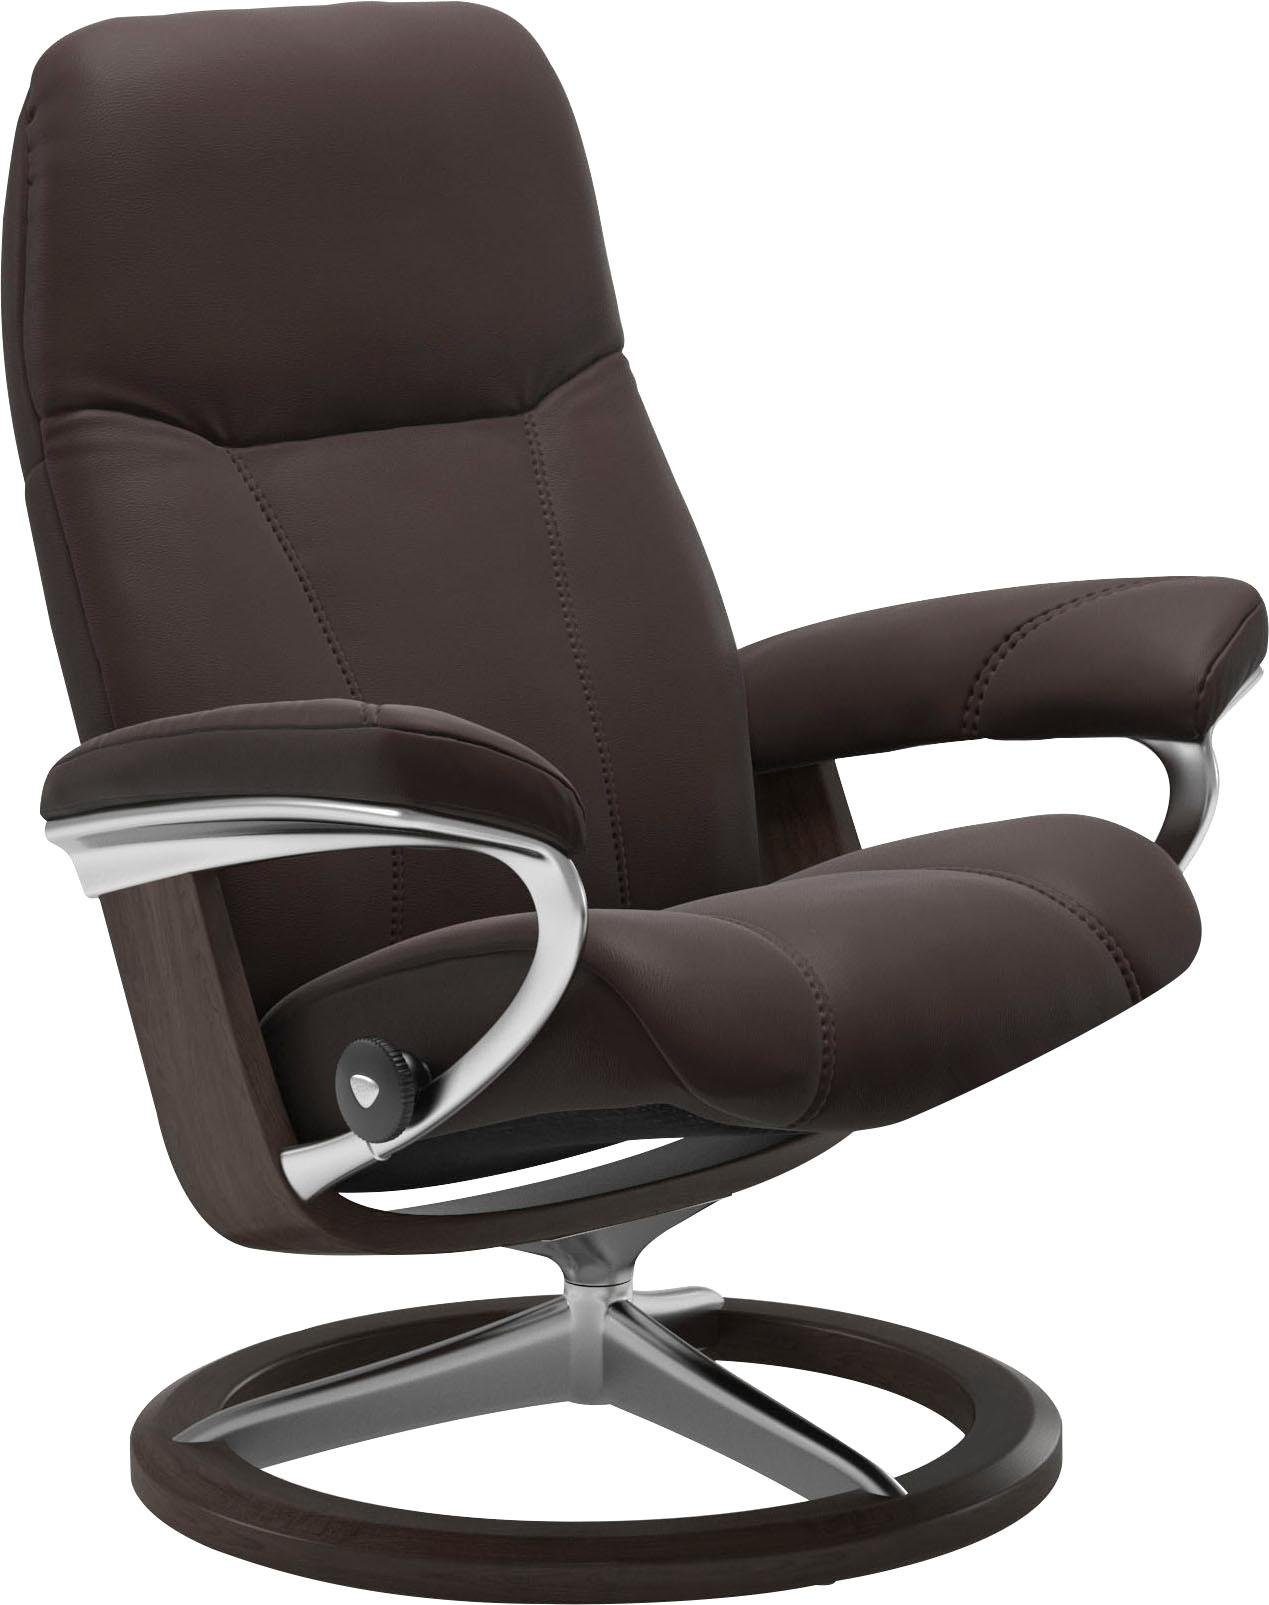 Stressless® Relaxsessel Wenge Größe Signature S, Base, Consul, mit Gestell